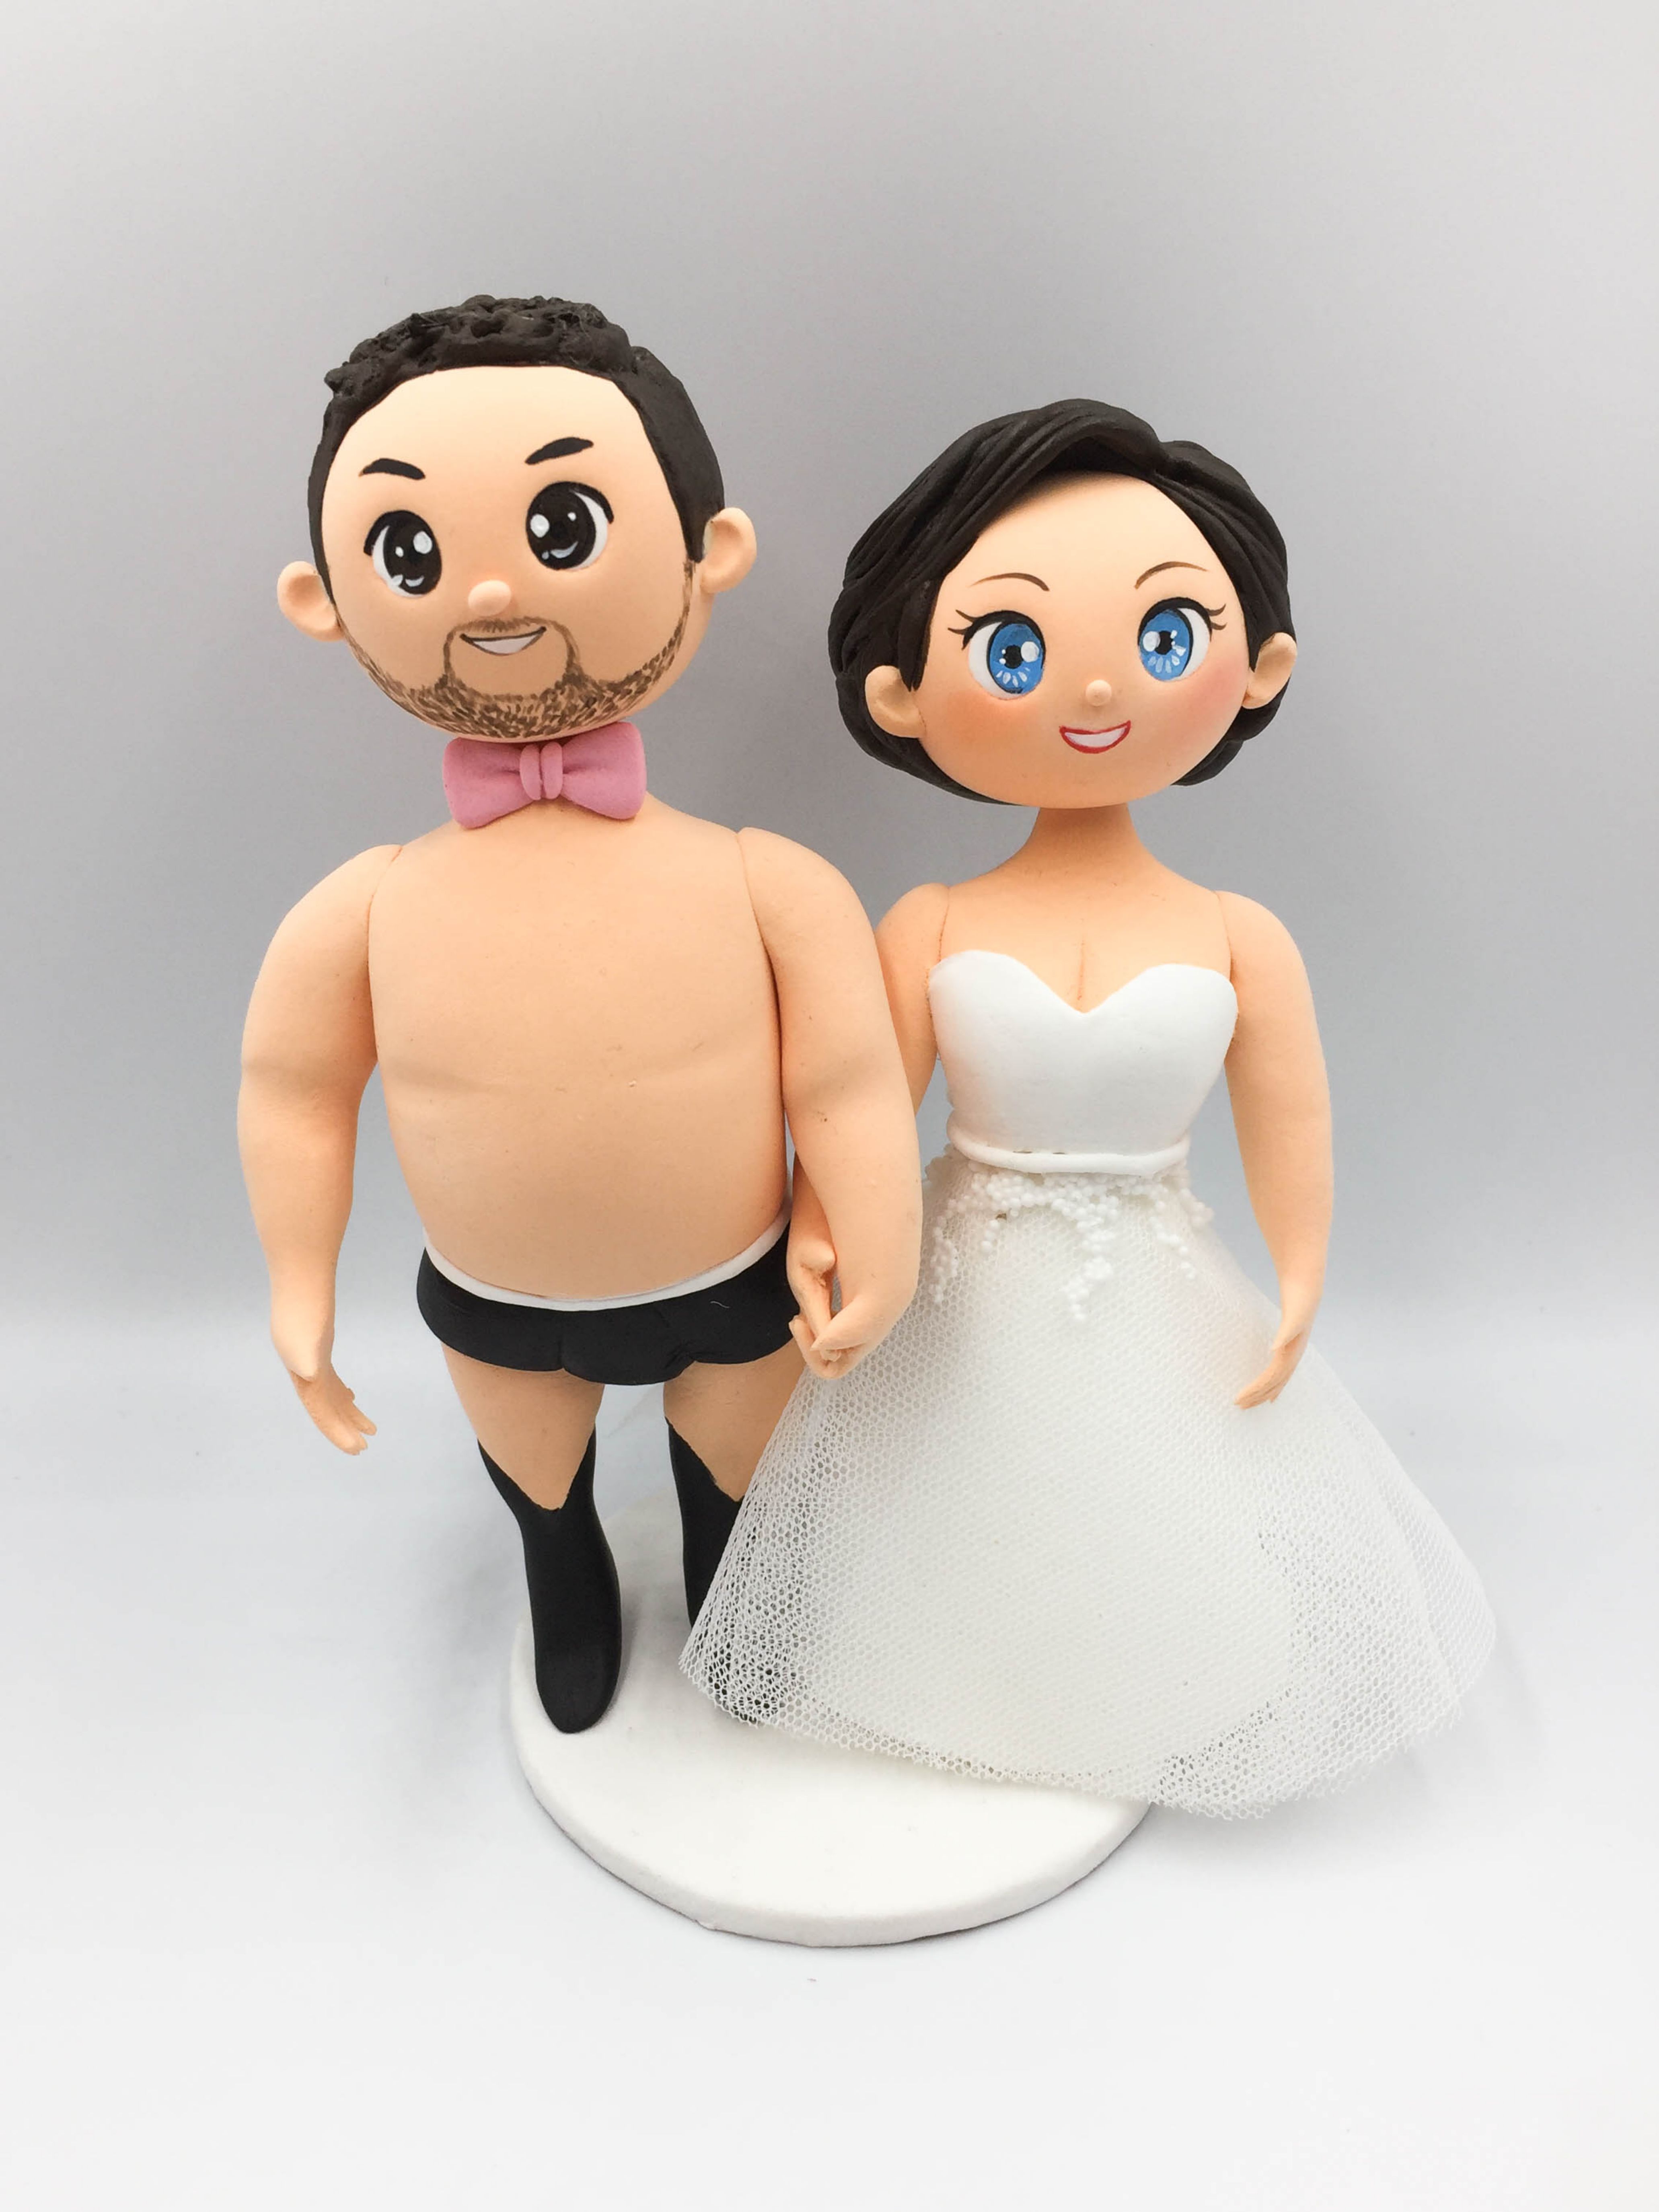 Picture of Sumo Wrestler Wedding Cake Topper, Boxers Groom with beautiful bride Wedding Cake Topper, Funny Groom Cake Topper